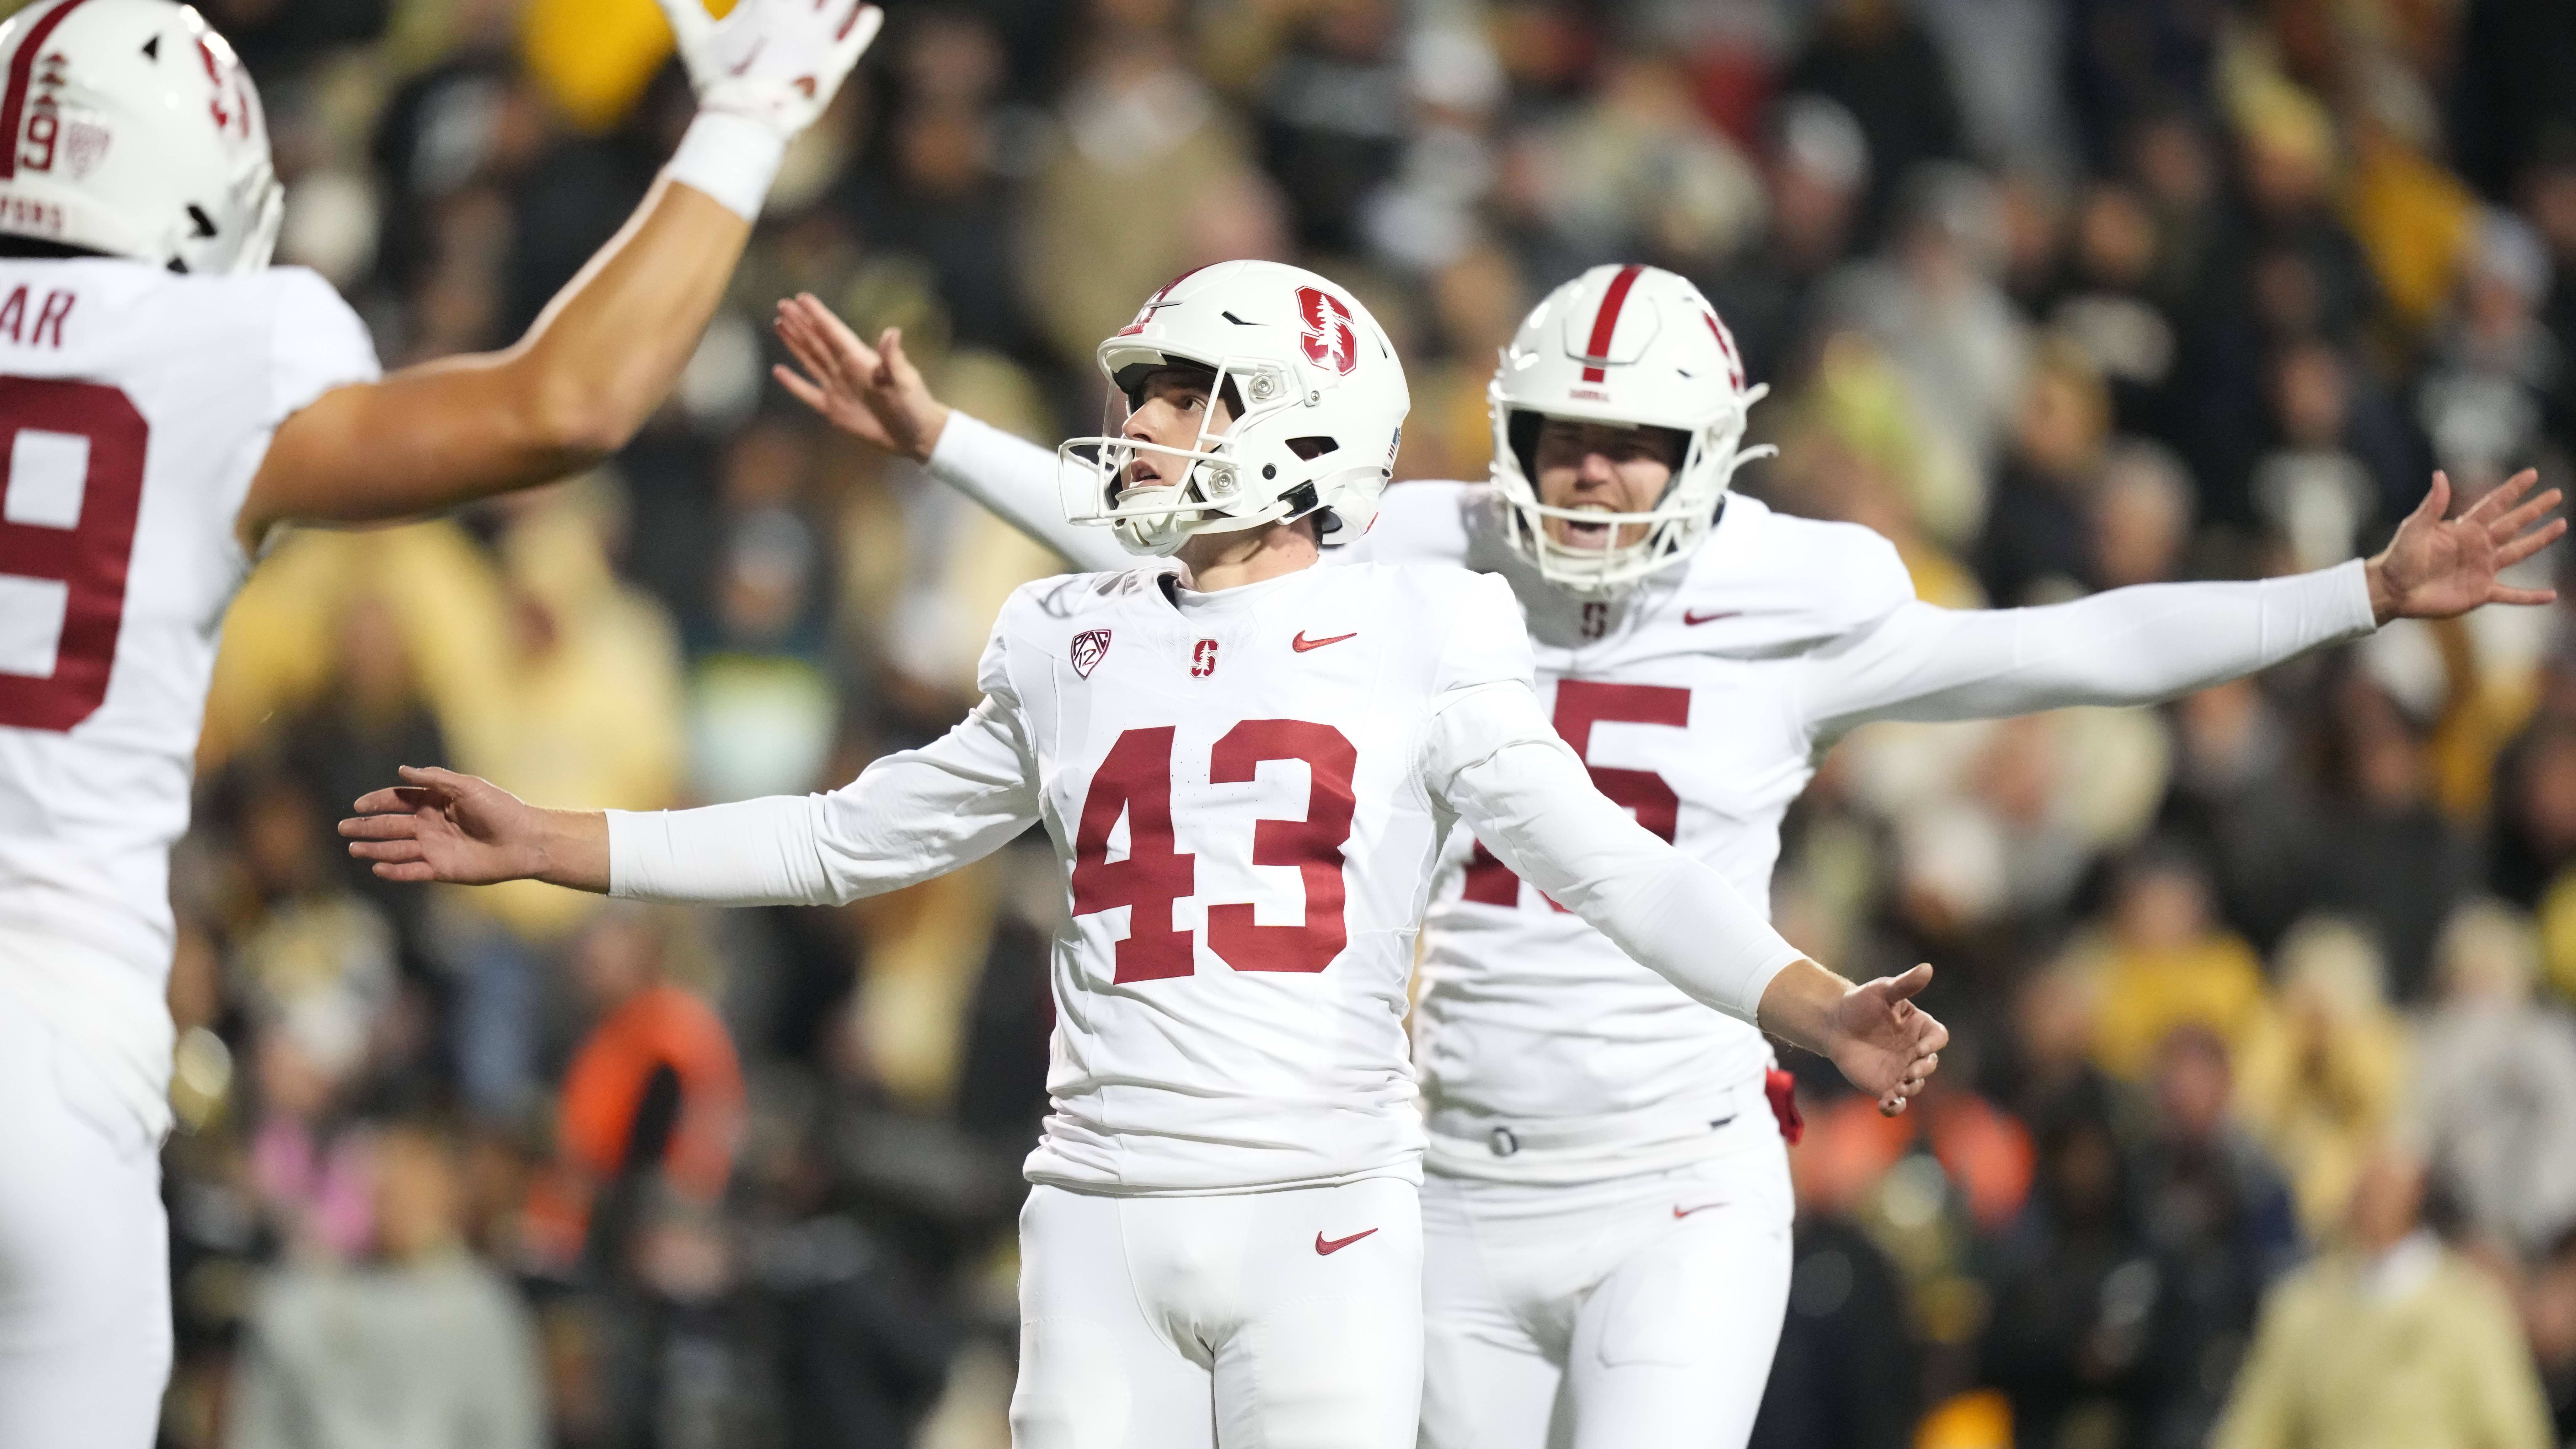 Stanford Cardinal Star Josh Karty Projected To Be Drafted By Recent Super Bowl Champs In Latest NFL Mock Draft